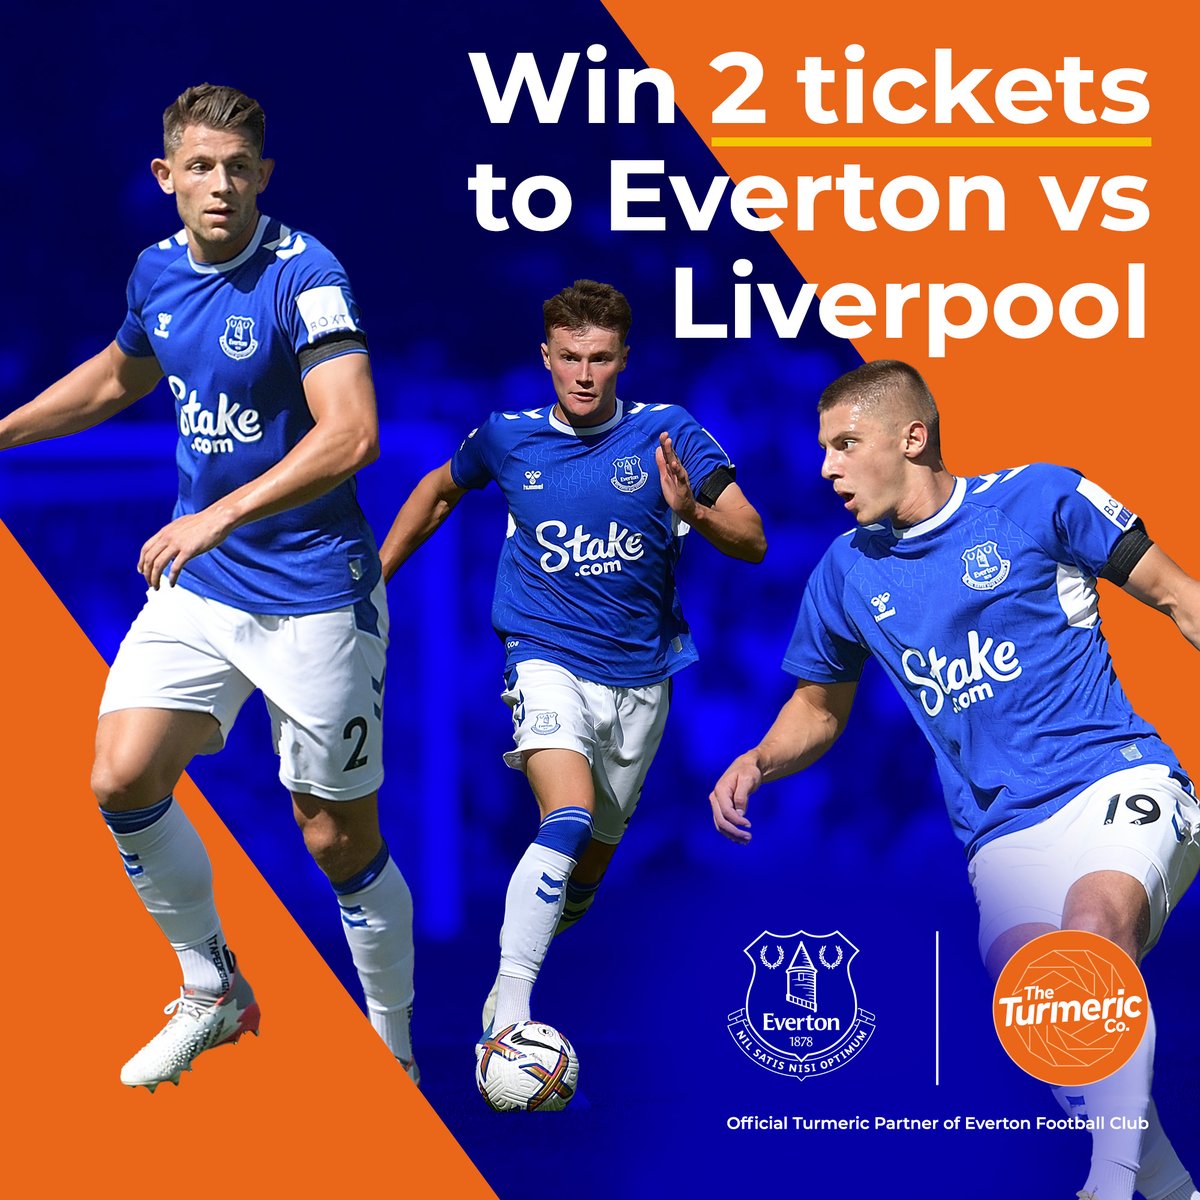 𝙂𝙄𝙑𝙀𝘼𝙒𝘼𝙔 𝙏𝙄𝙈𝙀 ⚽ We’ve got 2 x tickets to @Everton vs Liverpool at Goodison Park on the 3rd September, and we’re giving YOU the chance to win them! All you have to do is: ✅ LIKE this tweet ♻️ RETWEET this tweet Competition ends 30th August. 18+ only.